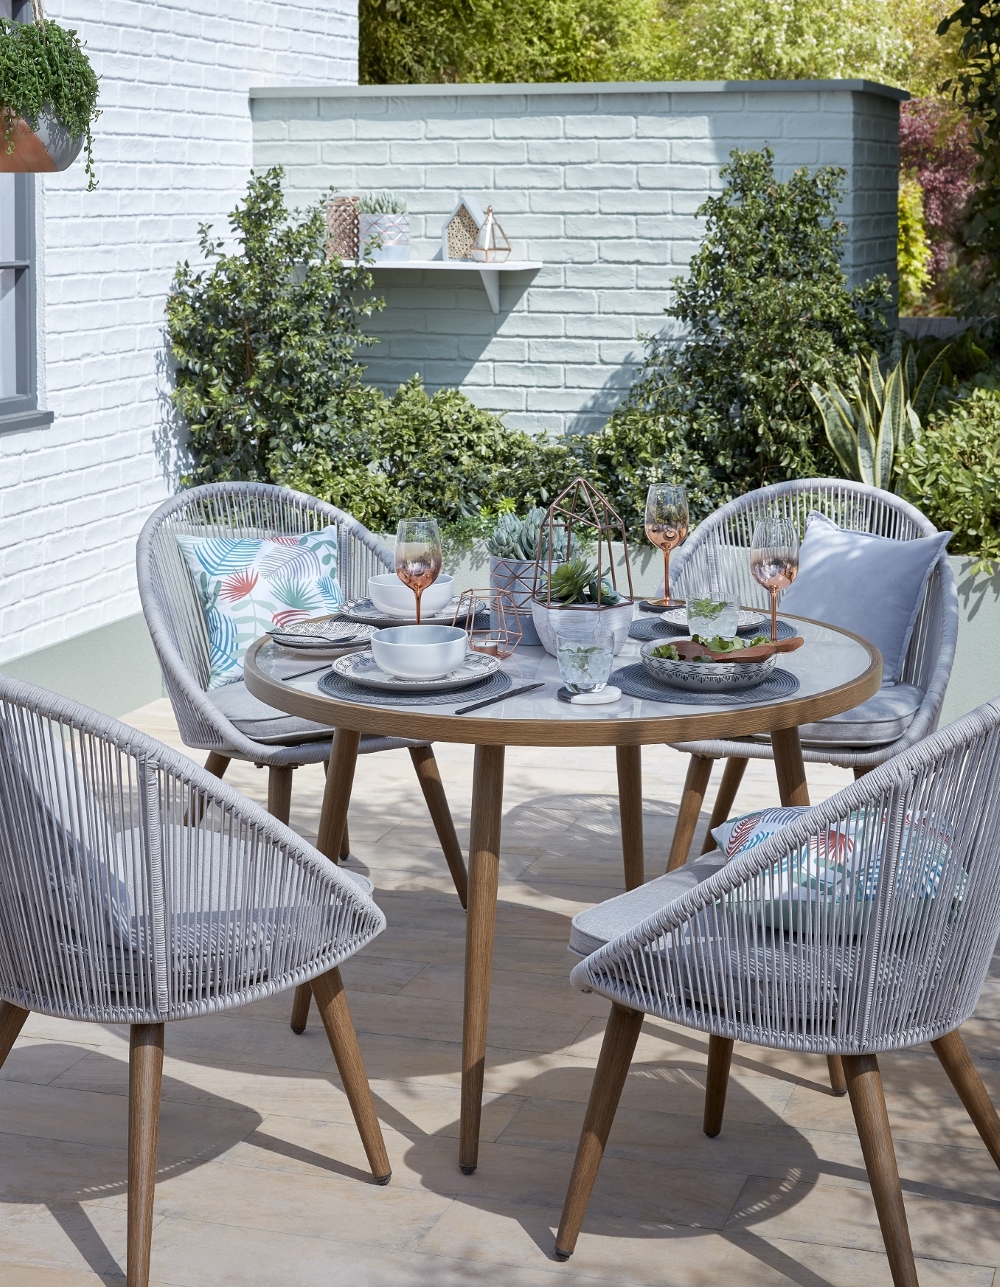 Nerja Five-Piece Table & Chair | George at Home range by Asda